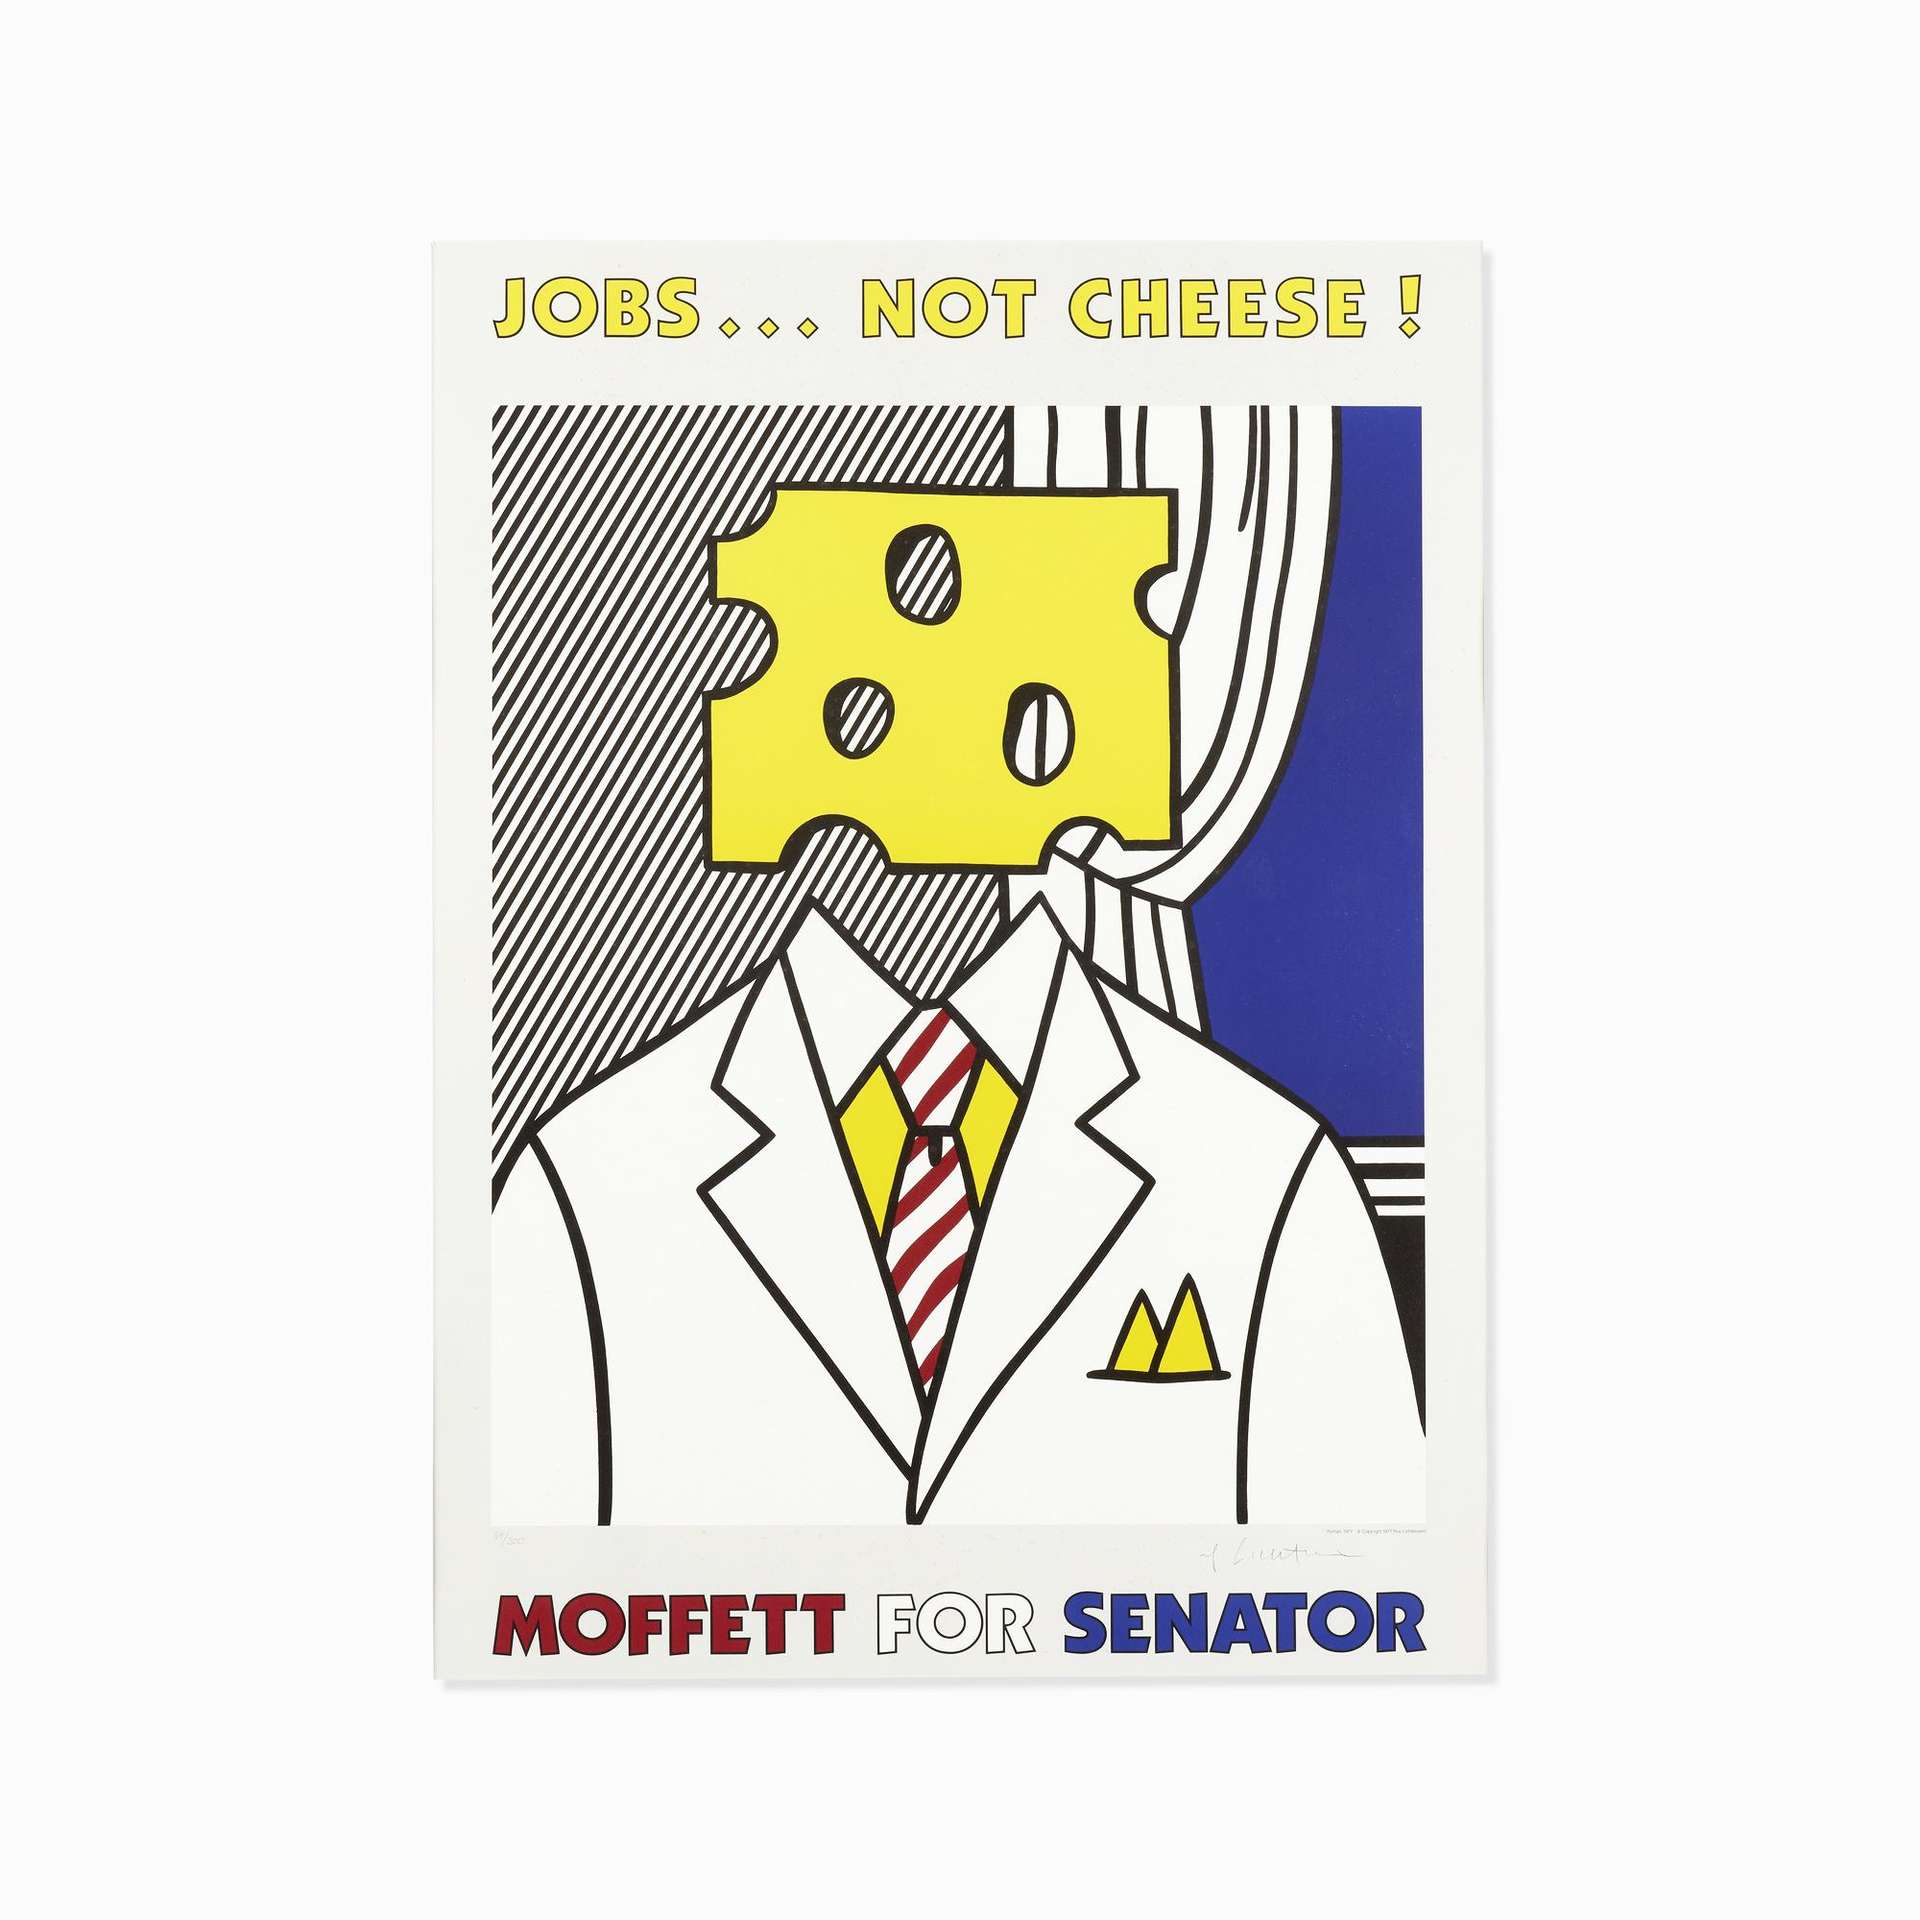 Roy Lichtenstein’s Jobs Not Cheese Moffett For Senator. A Pop Art, comic style poster of a suit with a slice of swiss cheese above it, positioned as a politician, with the text “JOBS…NOT CHEESE!” on top and “MOFFETT FOR SENATOR” at the bottom.